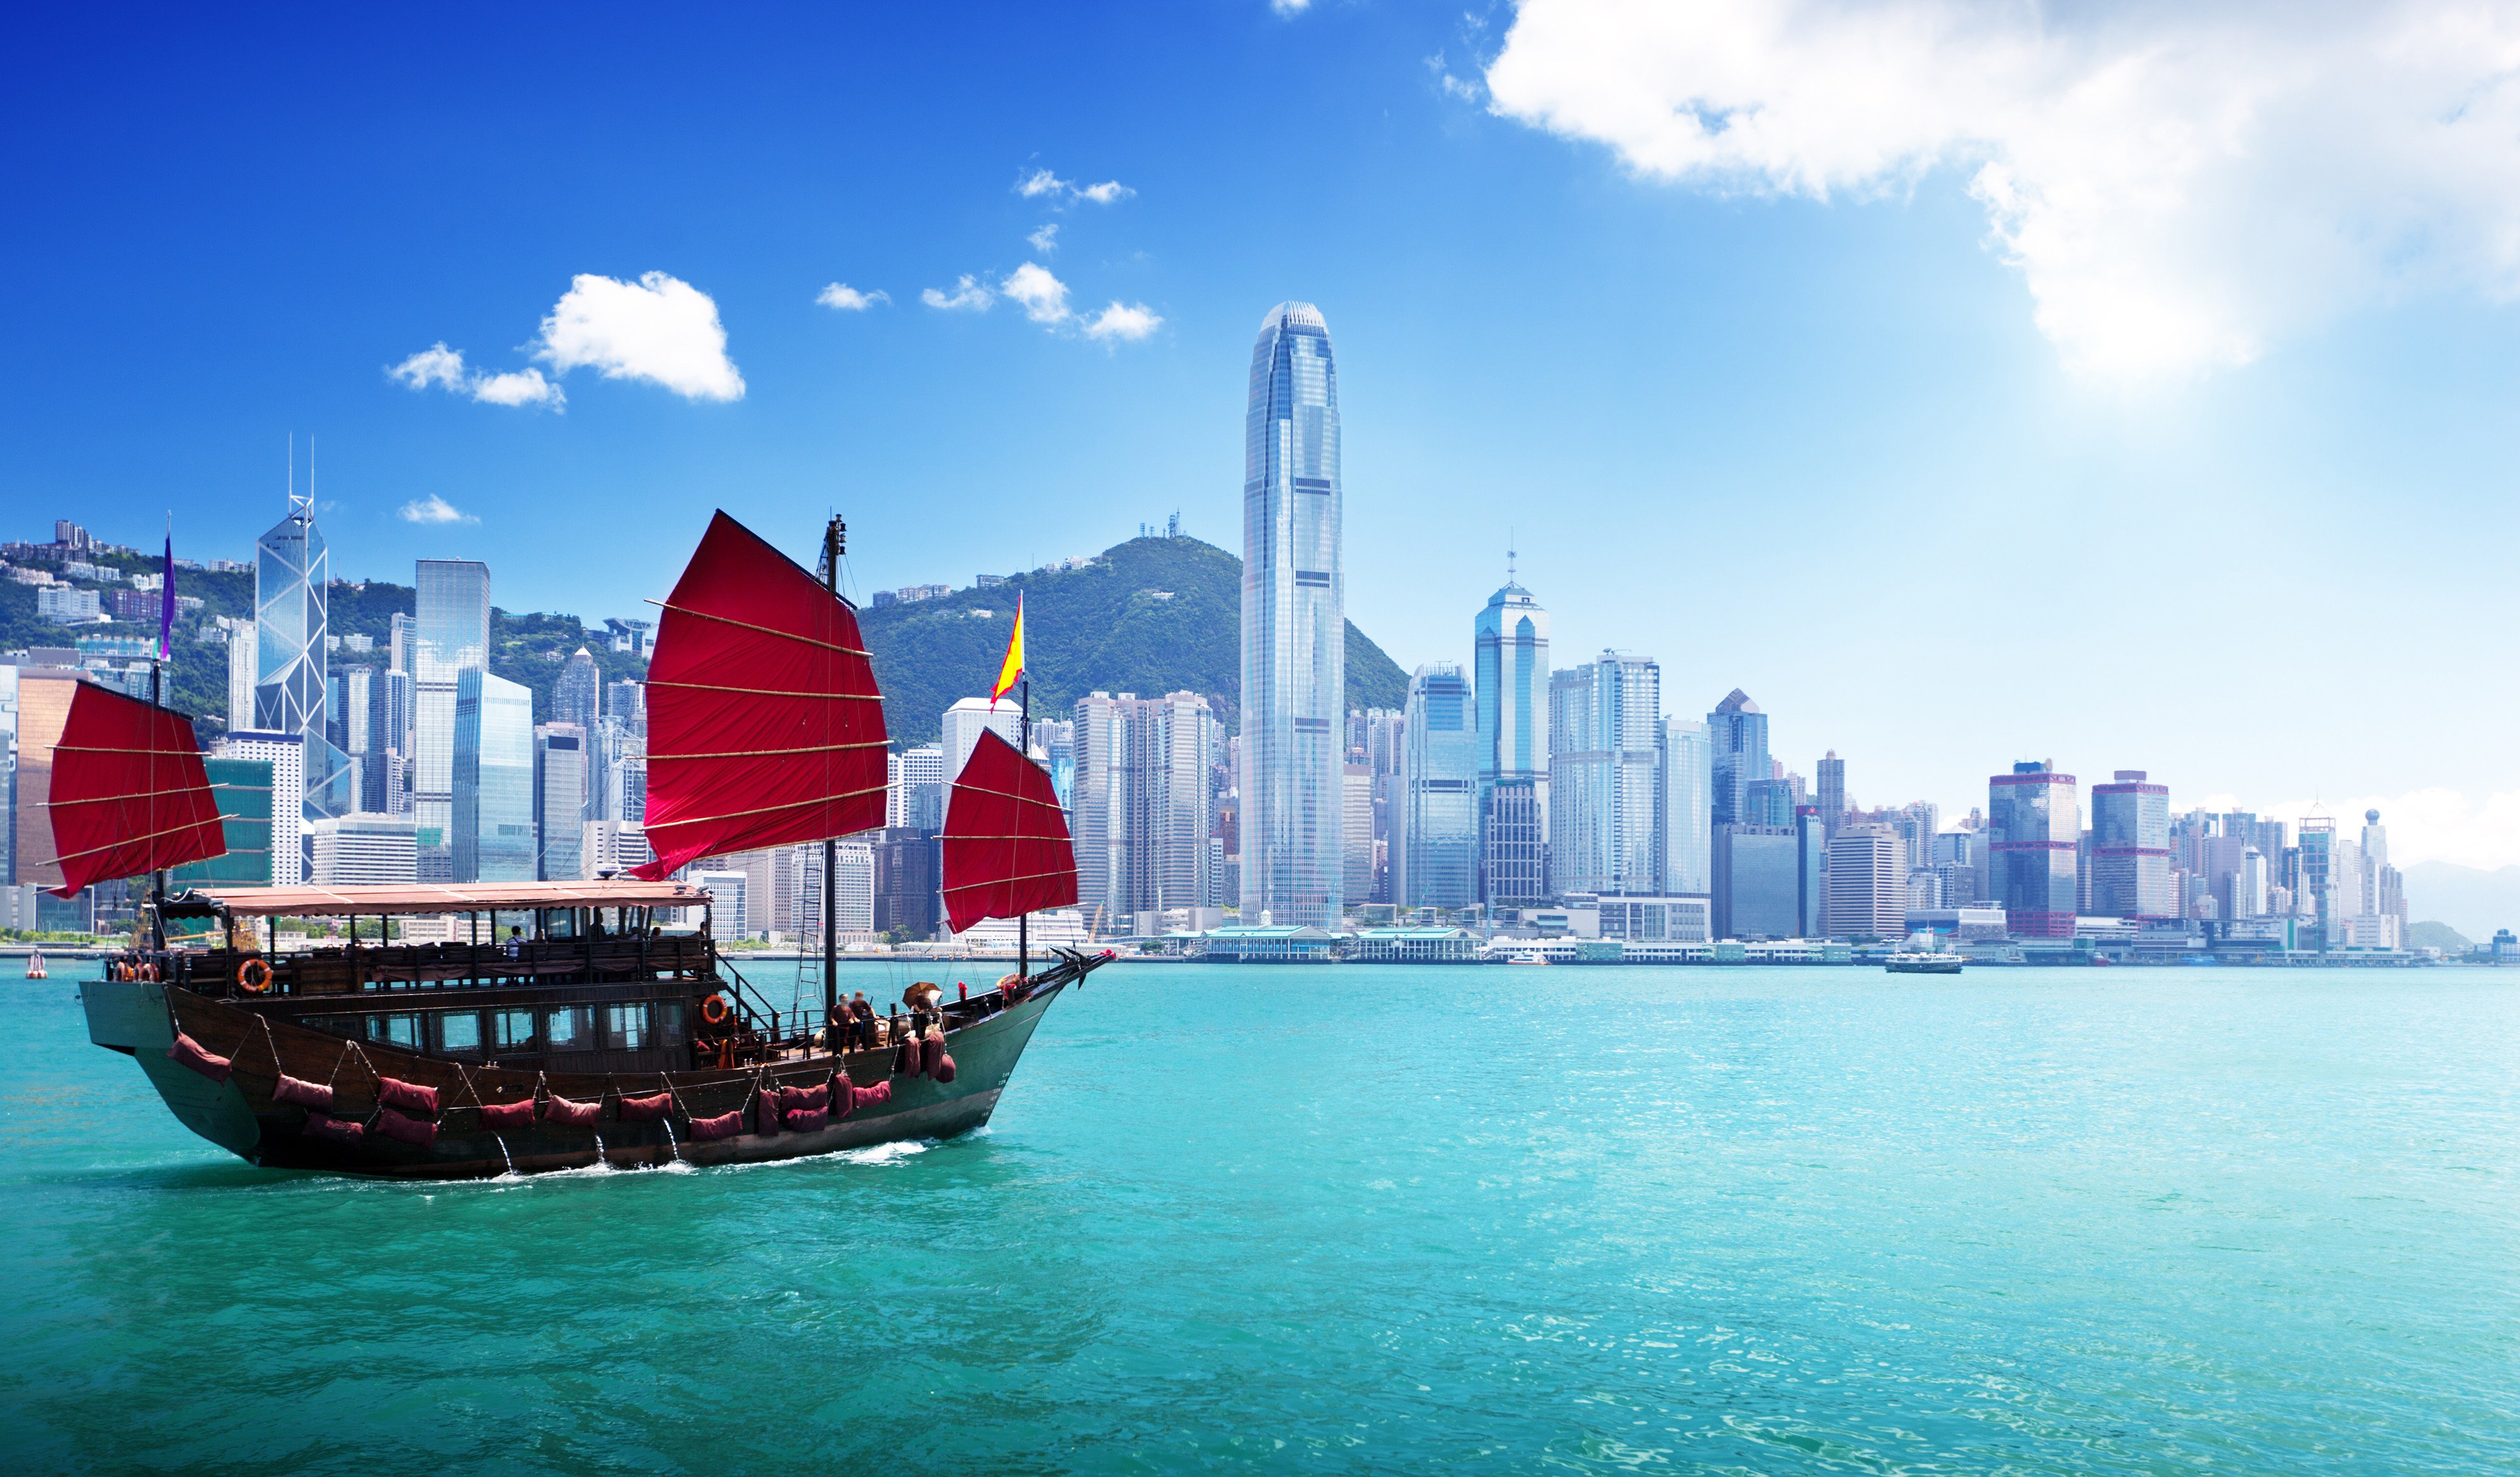 Hong Kong has stumbled for sure but it will bounce back as before. Photo: Shutterstock